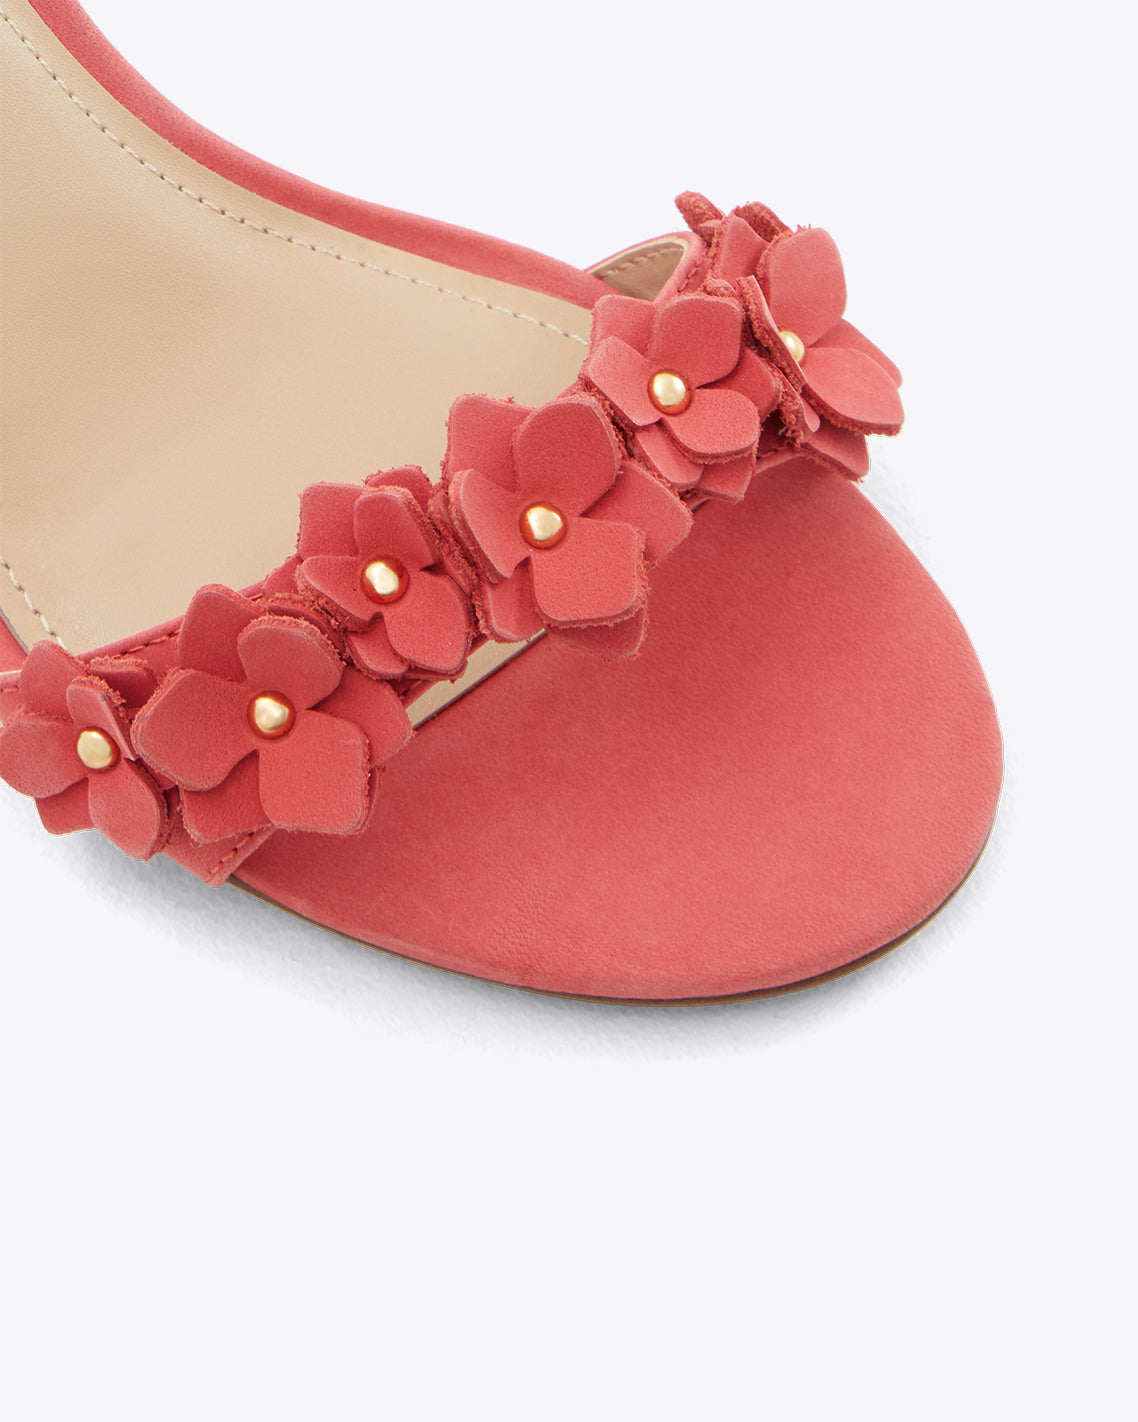 Floral Alice Ankle Strap Heels in Raspberry Pink